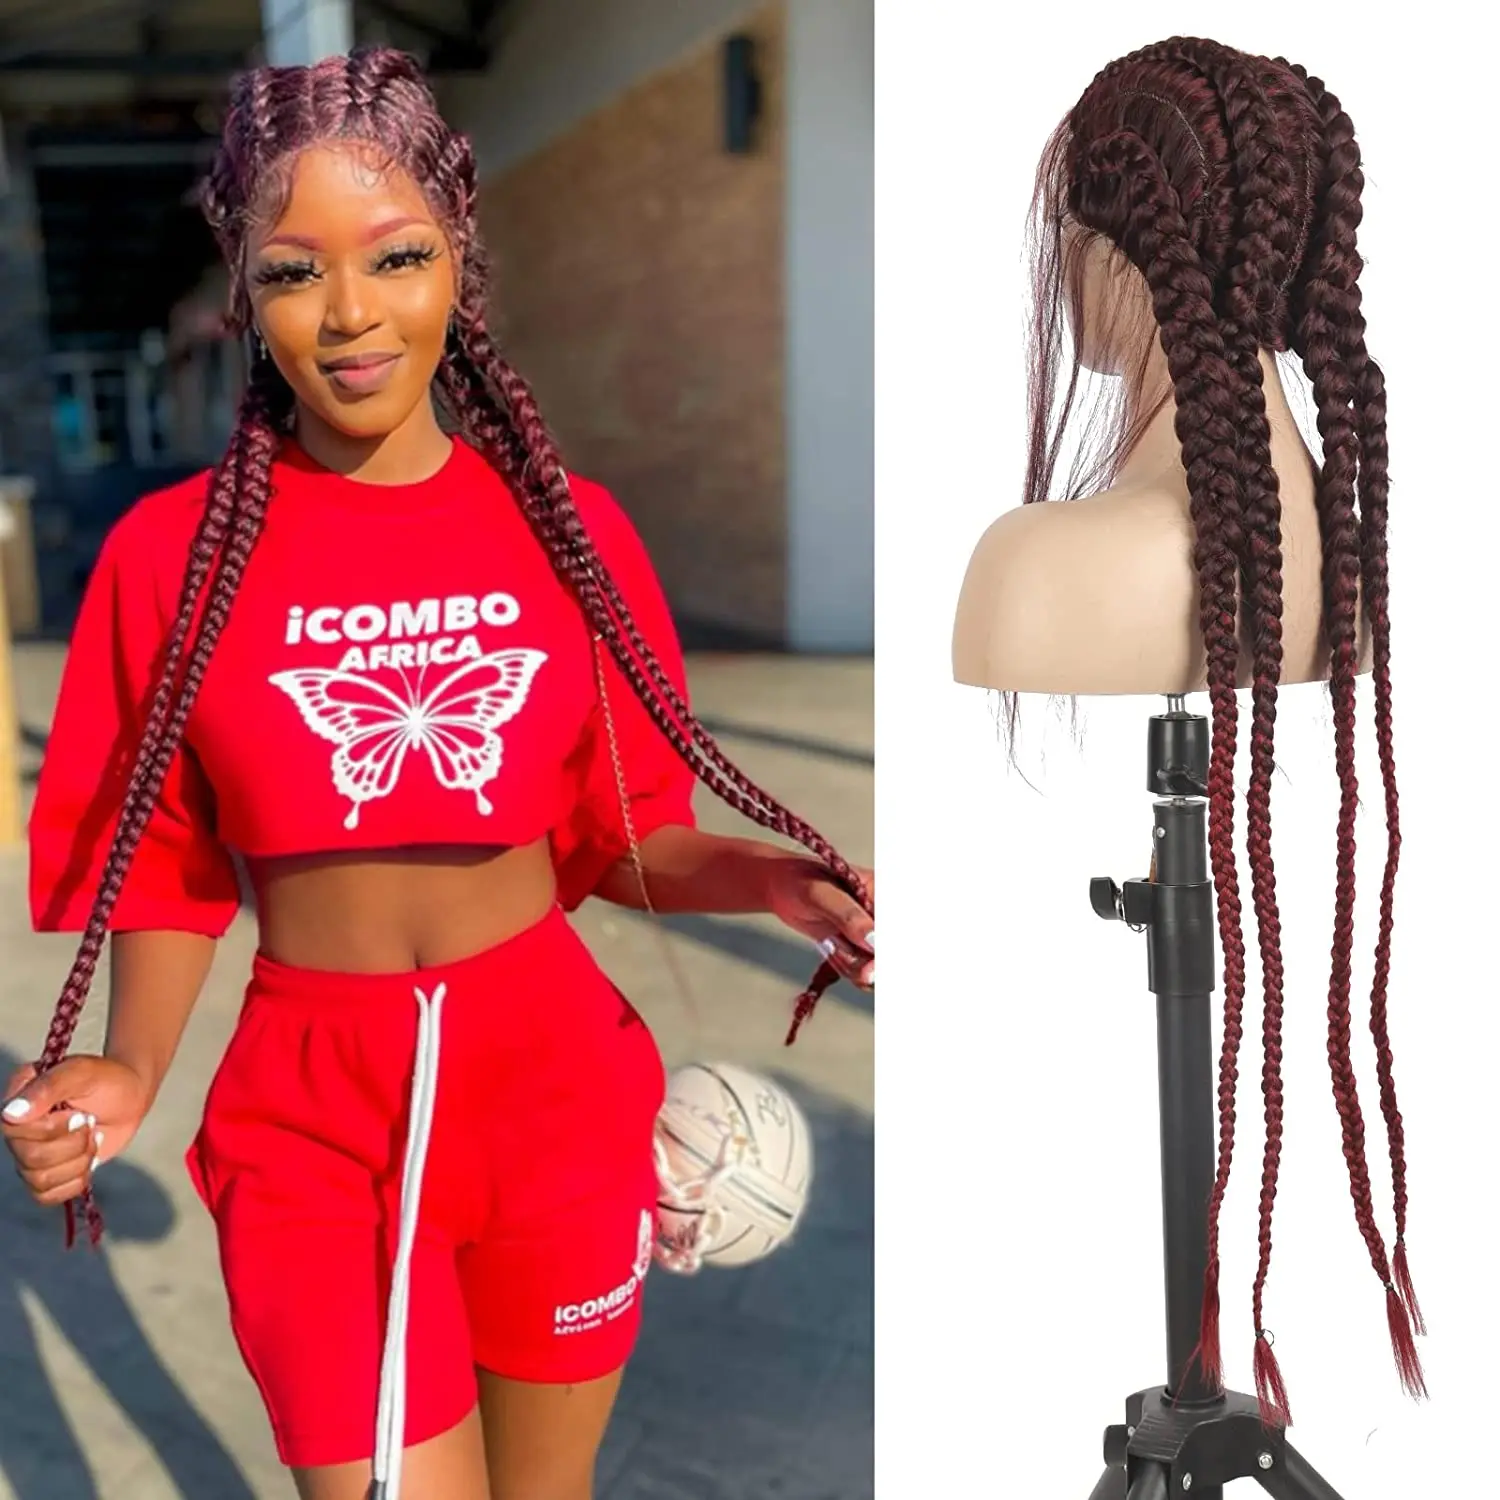 32 Inches Braided Synthetic Lace Front Wigs Double Dutch Box Braided Twist Braids With Baby Hair Lace Wigs For Black Women